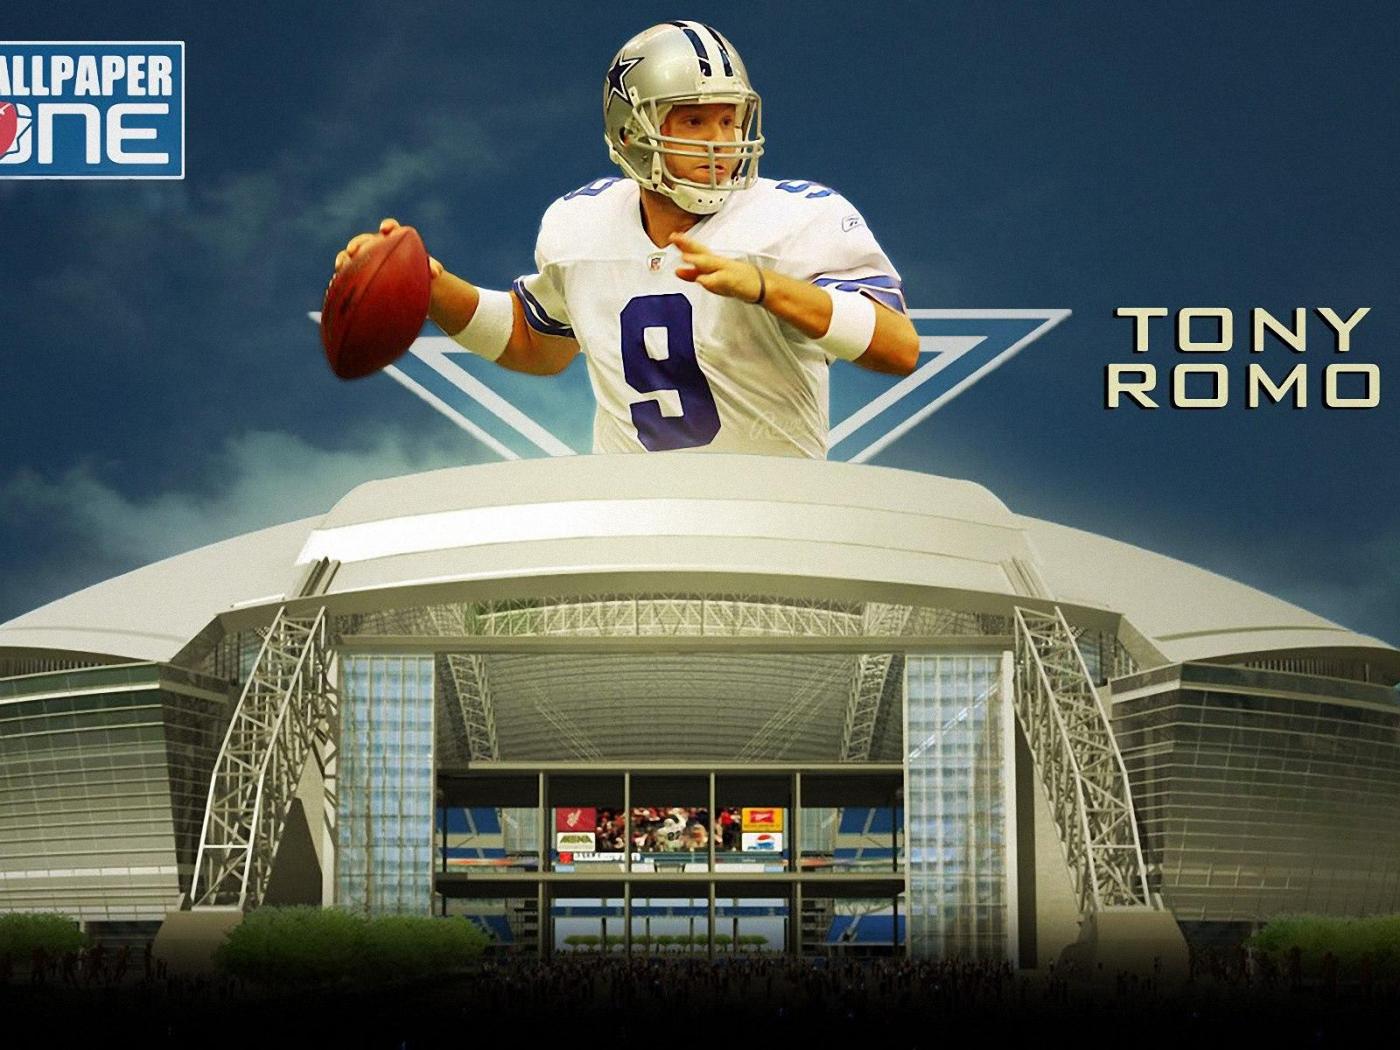 Tony Romo 1400x1050 Wallpapers 1400x1050 Wallpapers Pictures 1400x1050